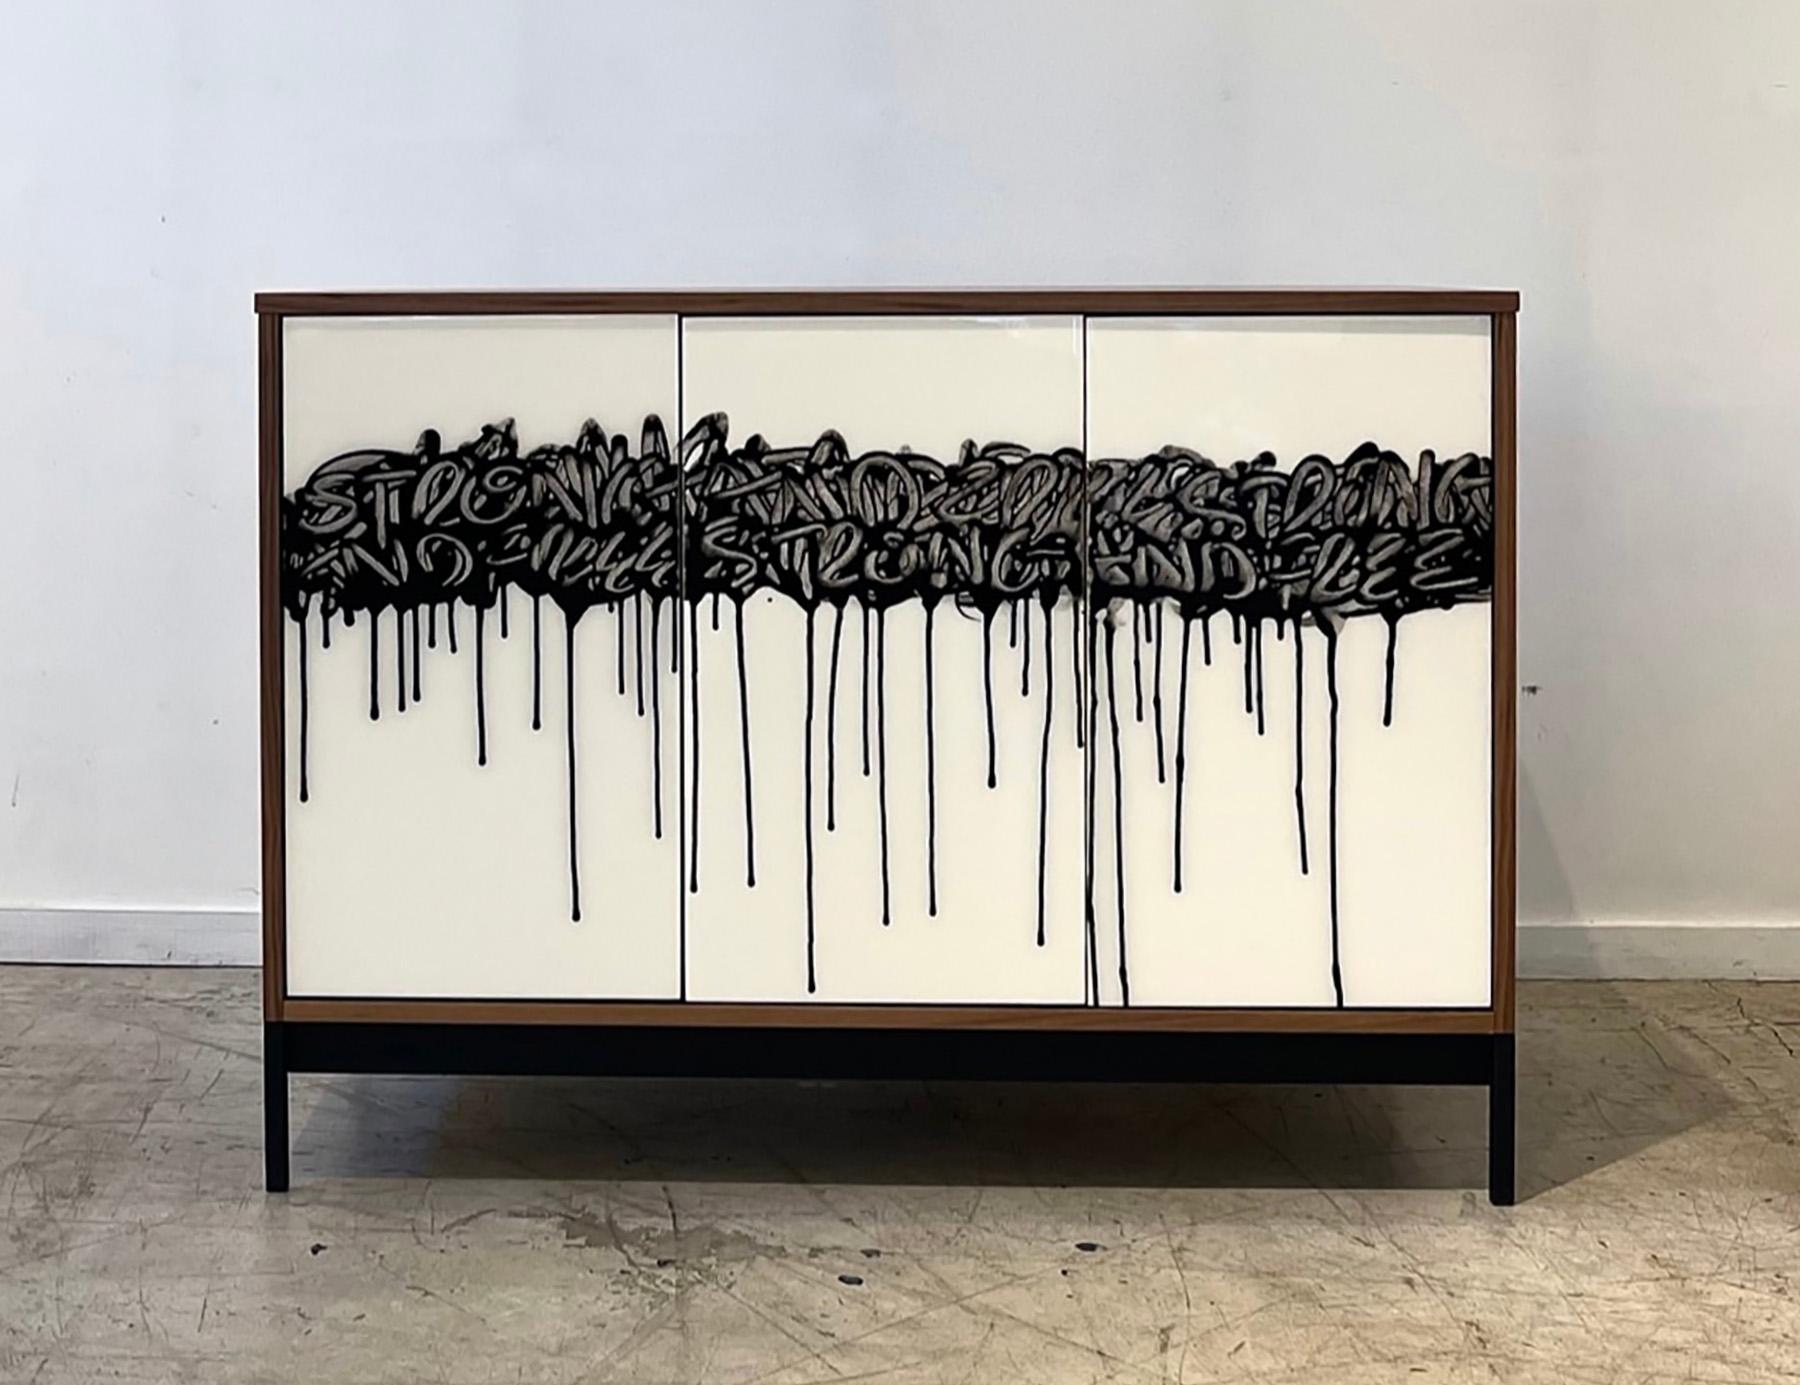 Finage cabinet by Morgan Clayhall
Dimensions: D 45.72 x W 182.88 x H 81.28 cm
Materials: Walnut, oil paint, mix medium, resin, steel
Also available: Can be customized in size, finish and color

The Finage cabinet is painted by-hand, each